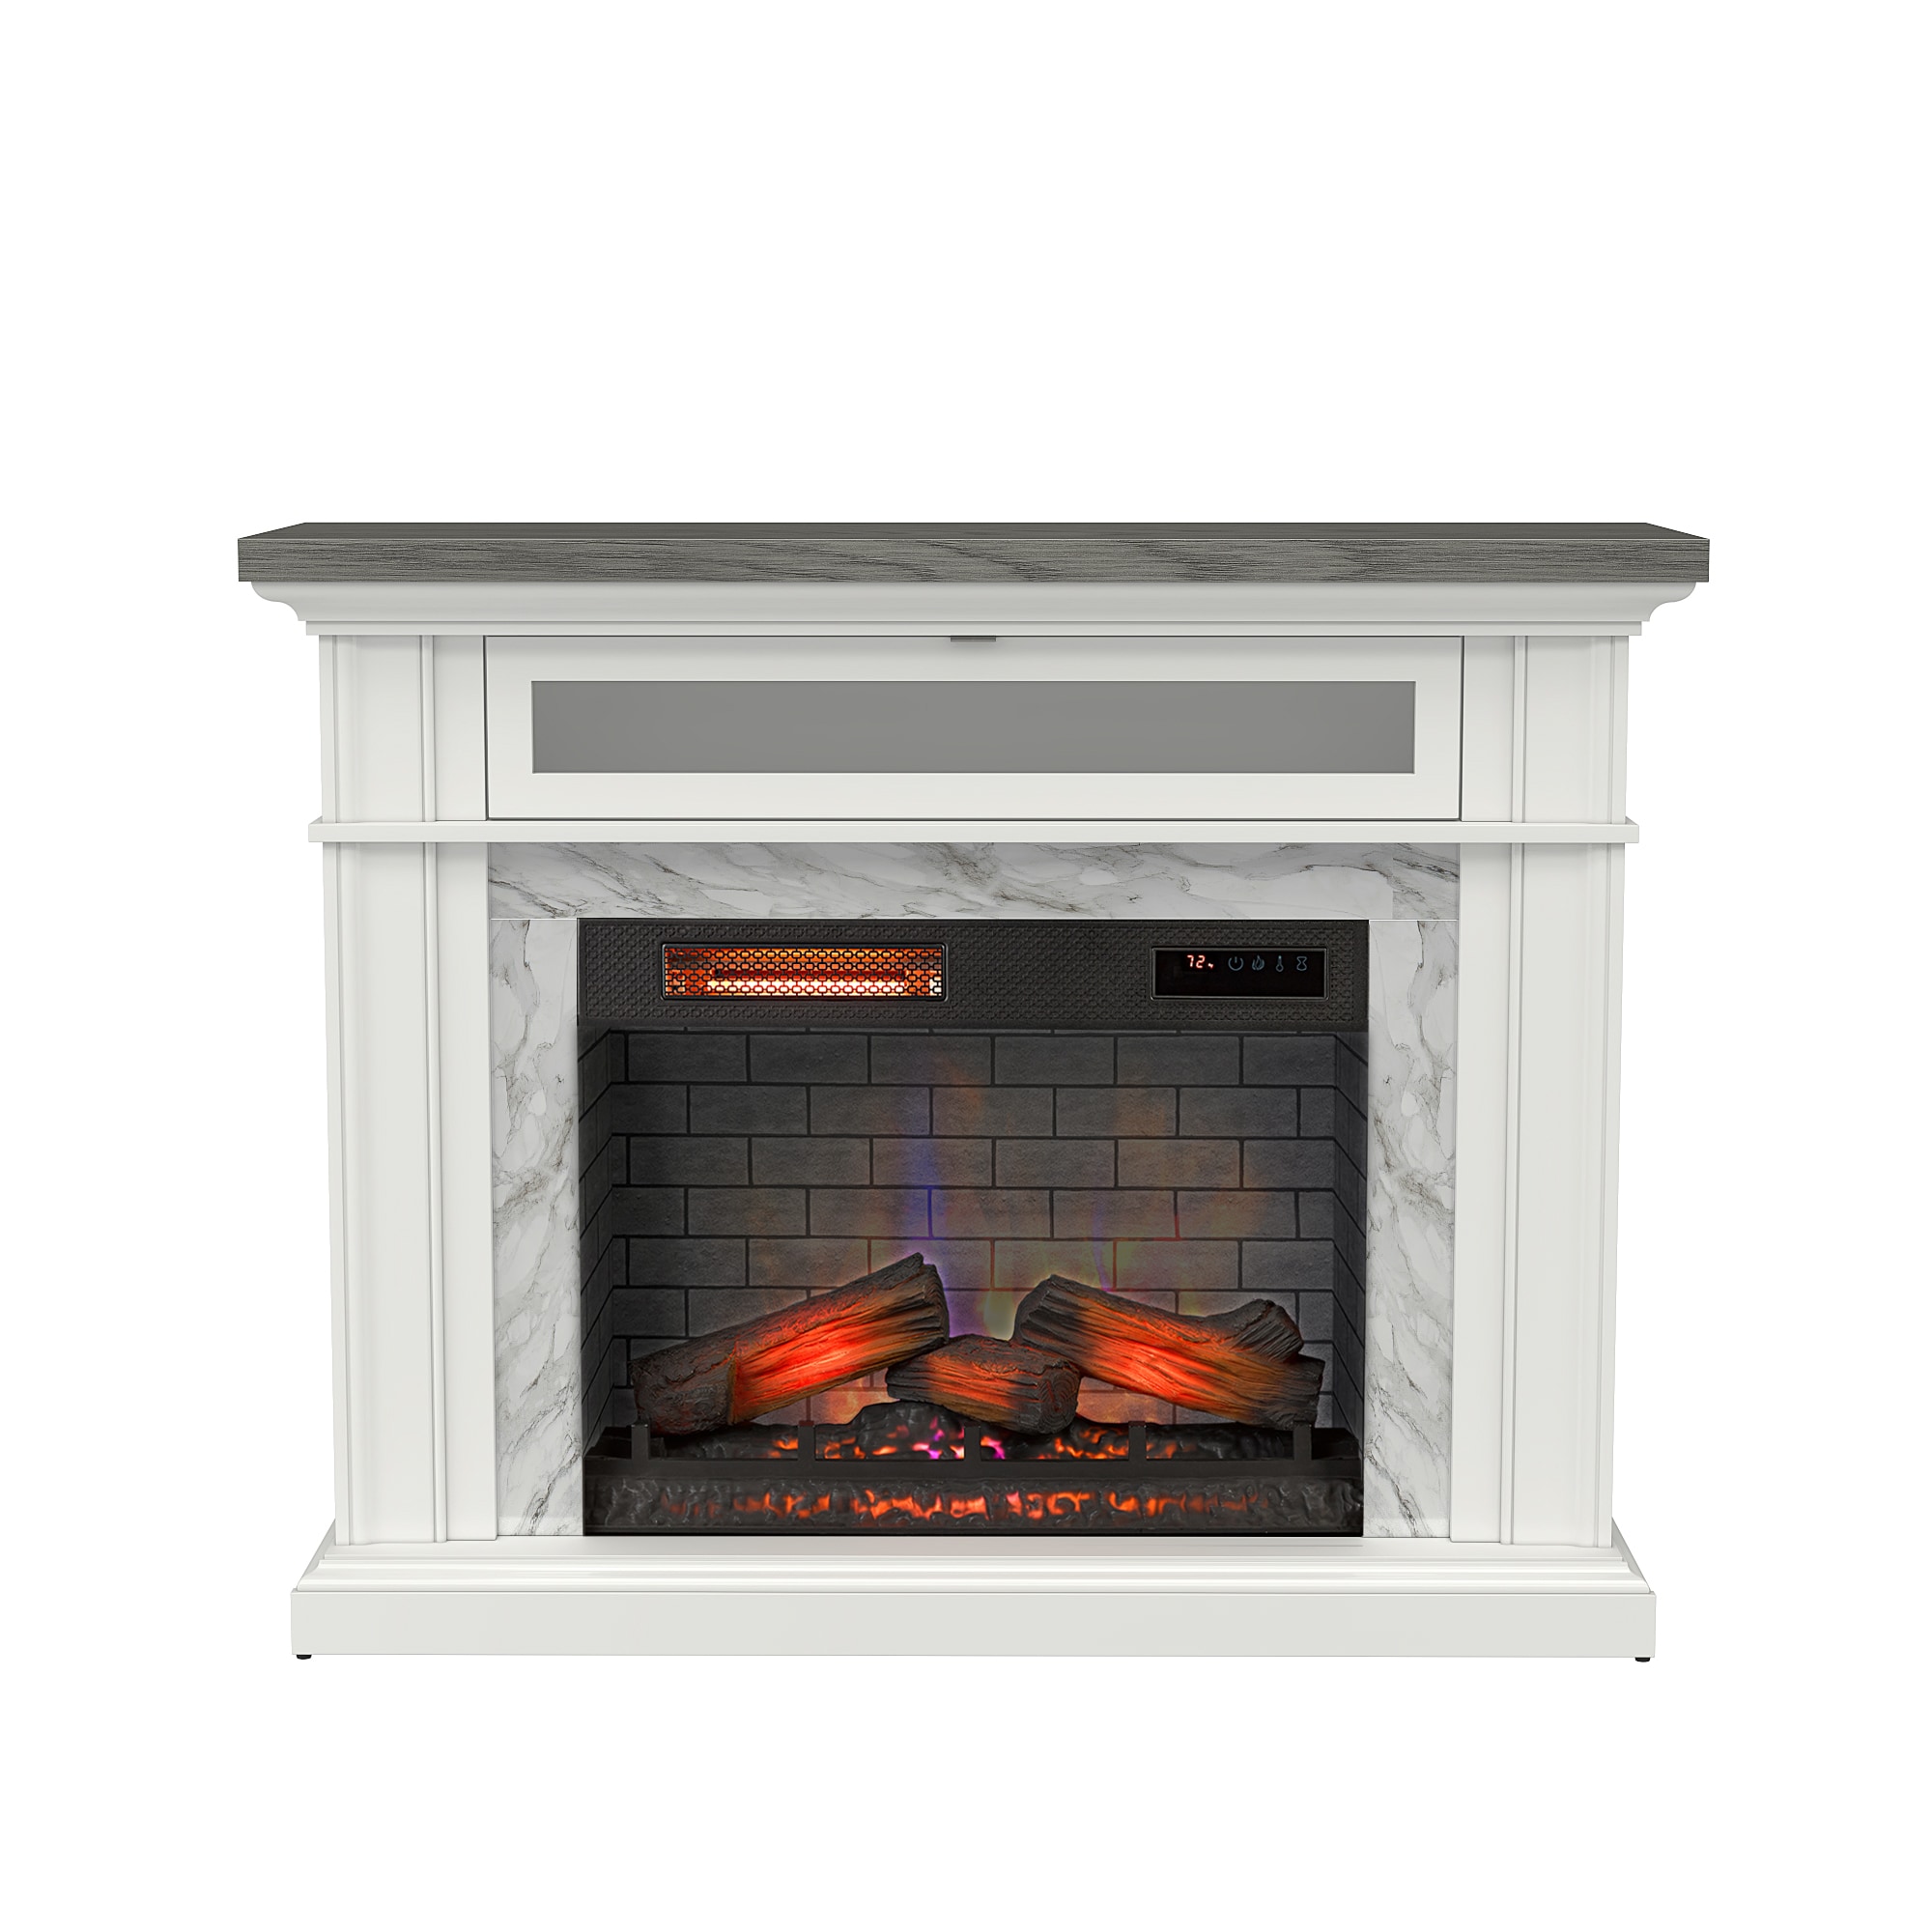 51-in W x 40-in H x 15.5-in D Bright White Composite Modern Fireplace Mantel | - allen + roth 149148